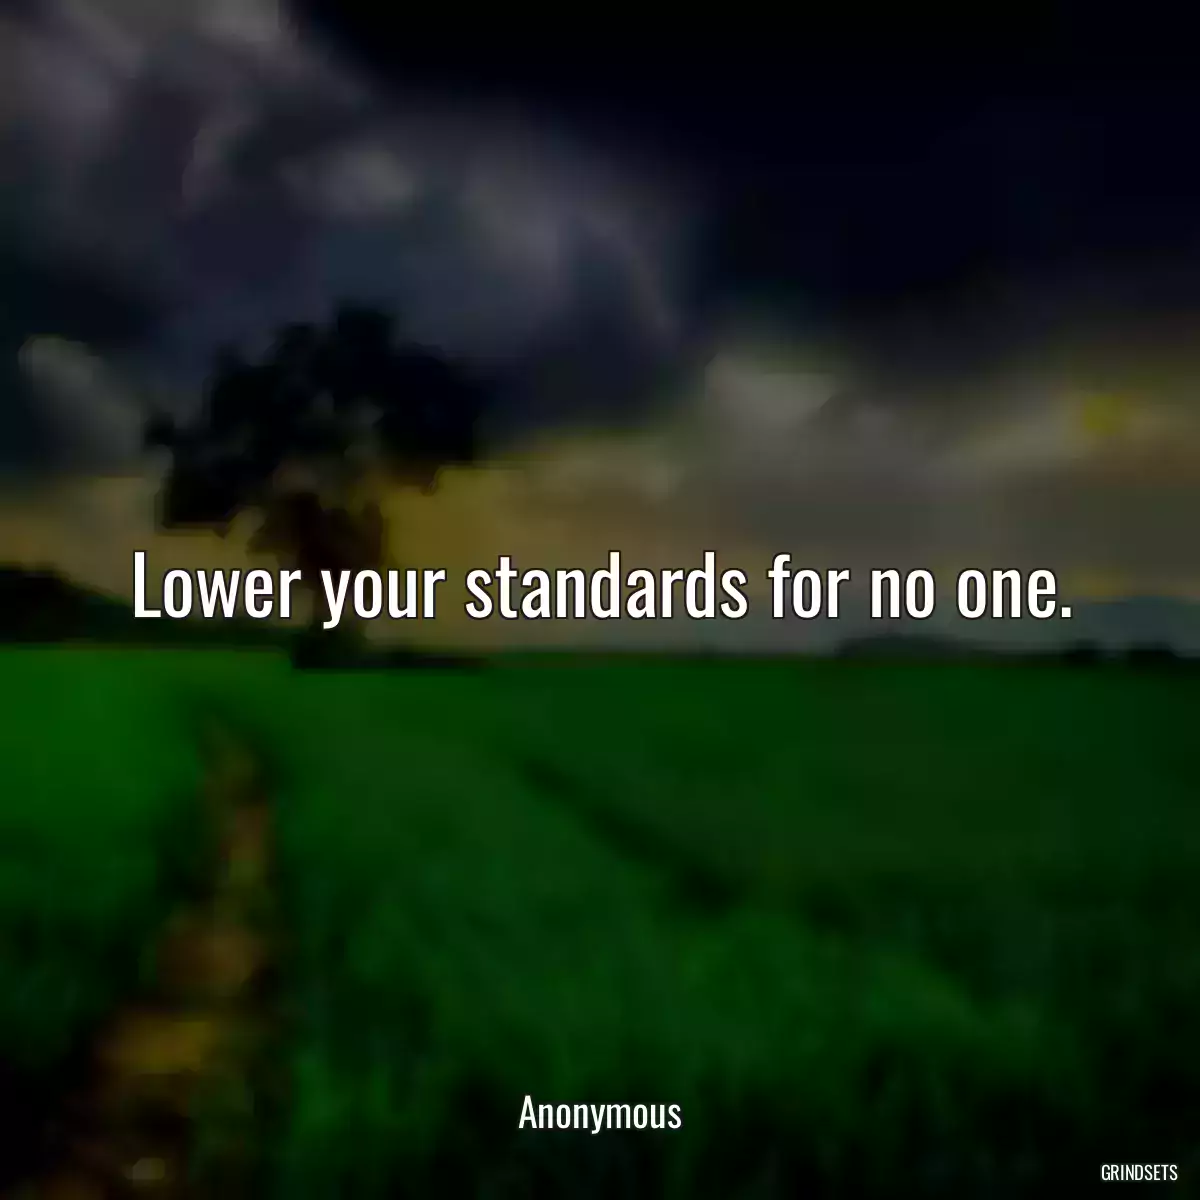 Lower your standards for no one.